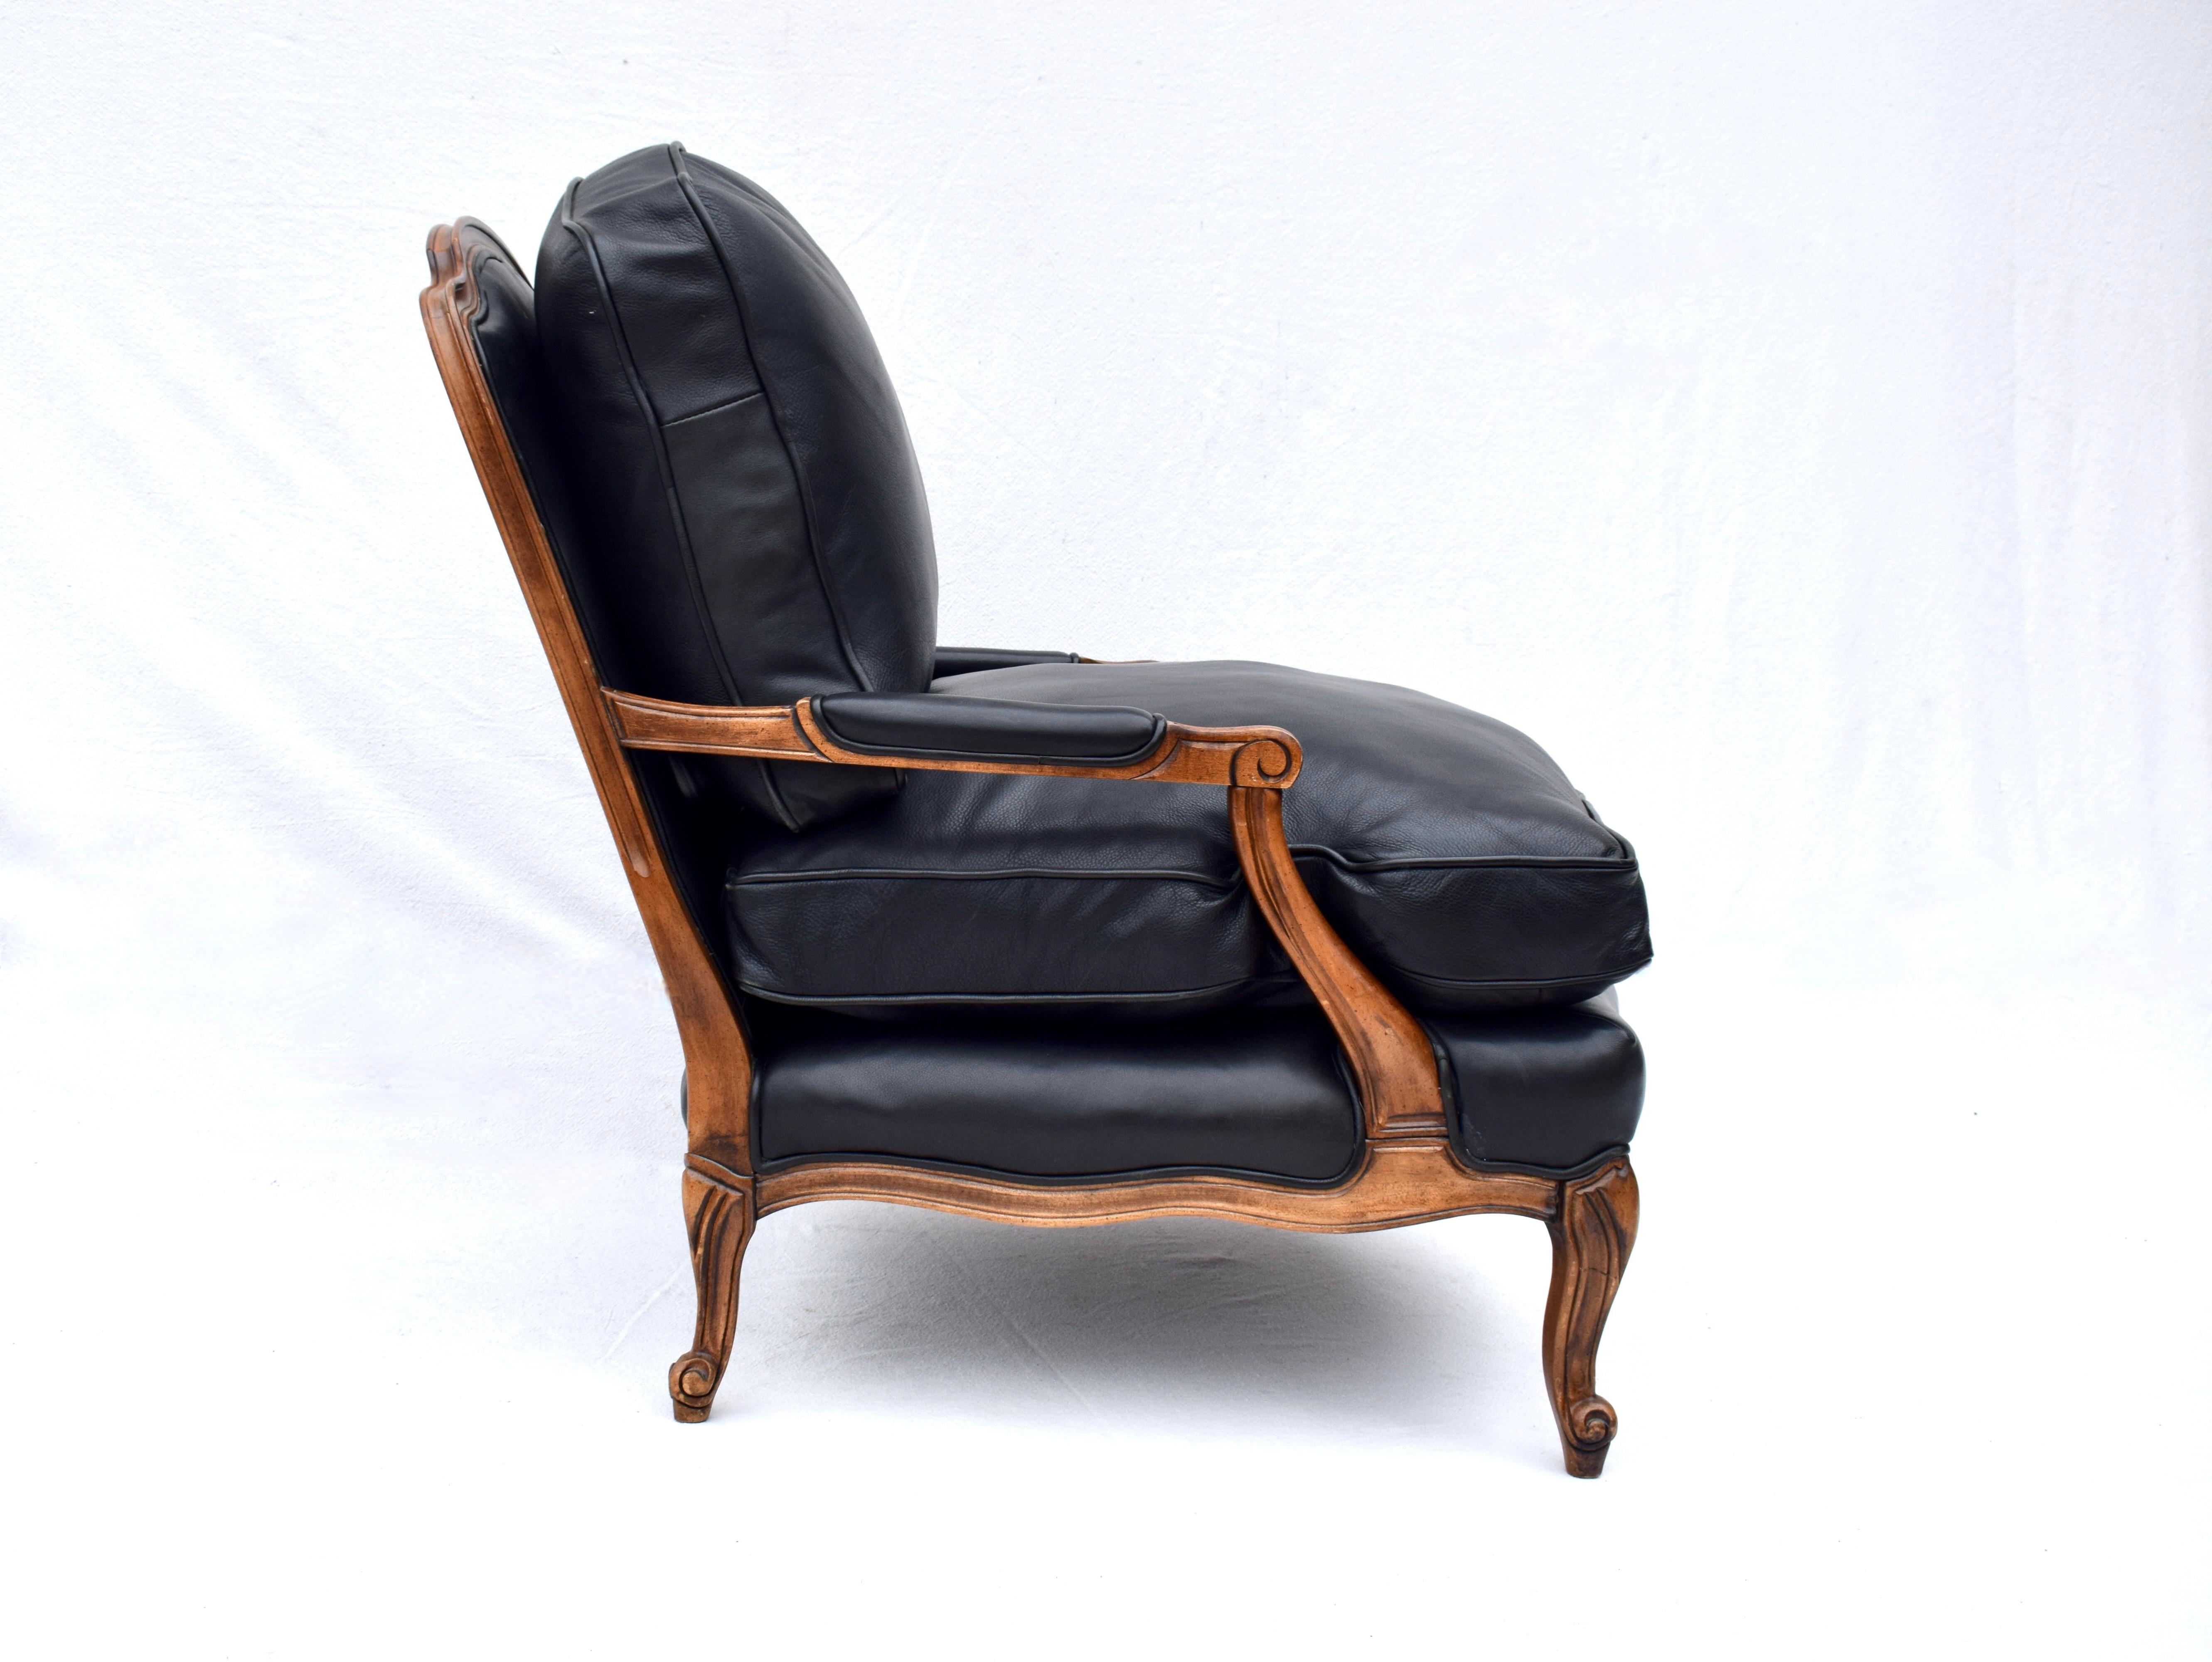 American Woodward & Lothrop Top of the Line Black Leather and Walnut Club Chair & Ottoman